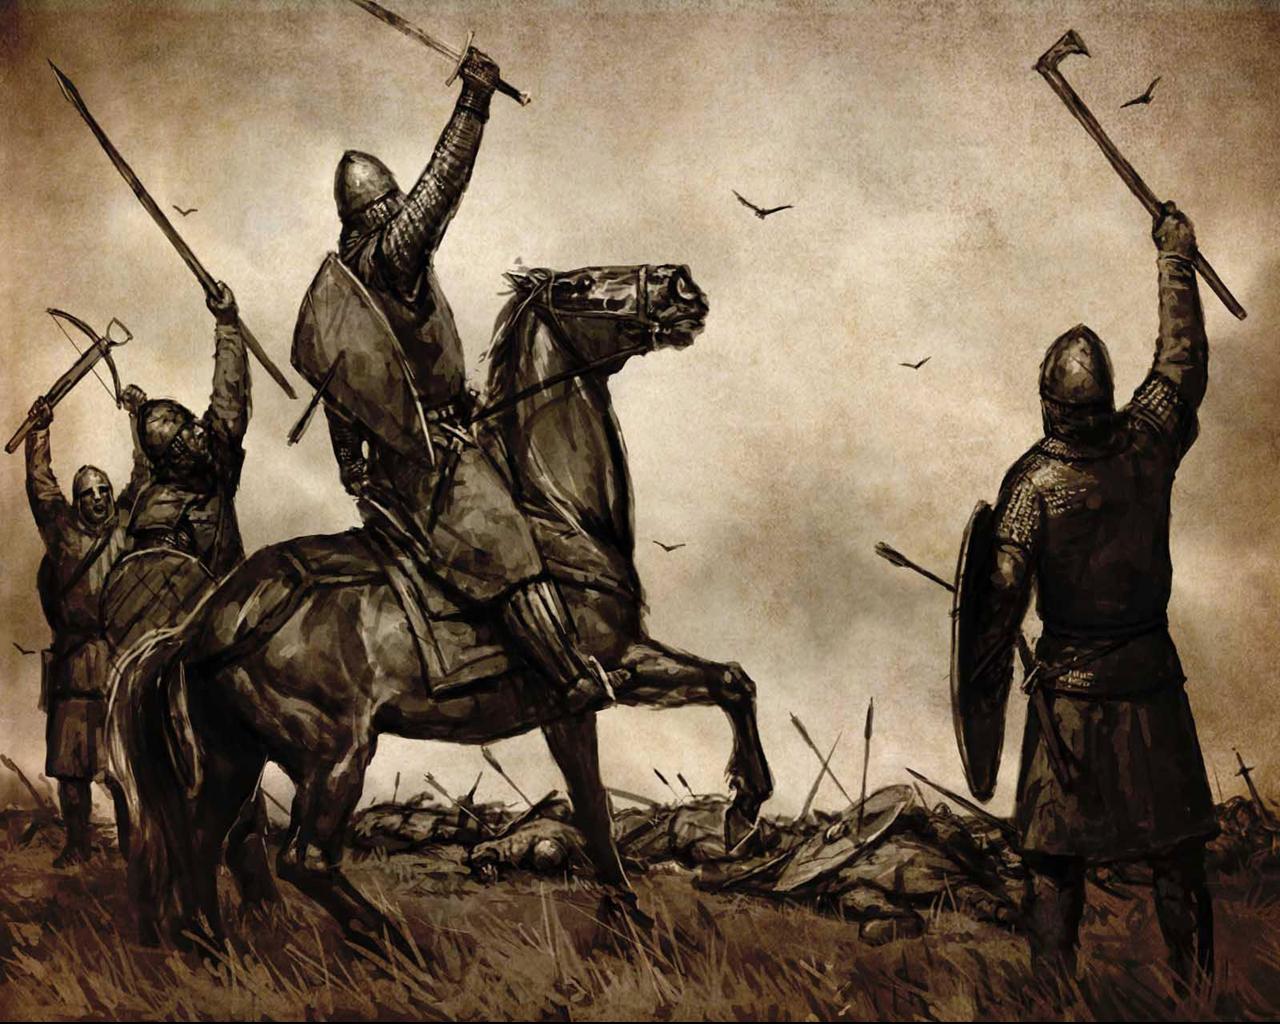 Mount & Blade Wallpaper and Background Imagex1024